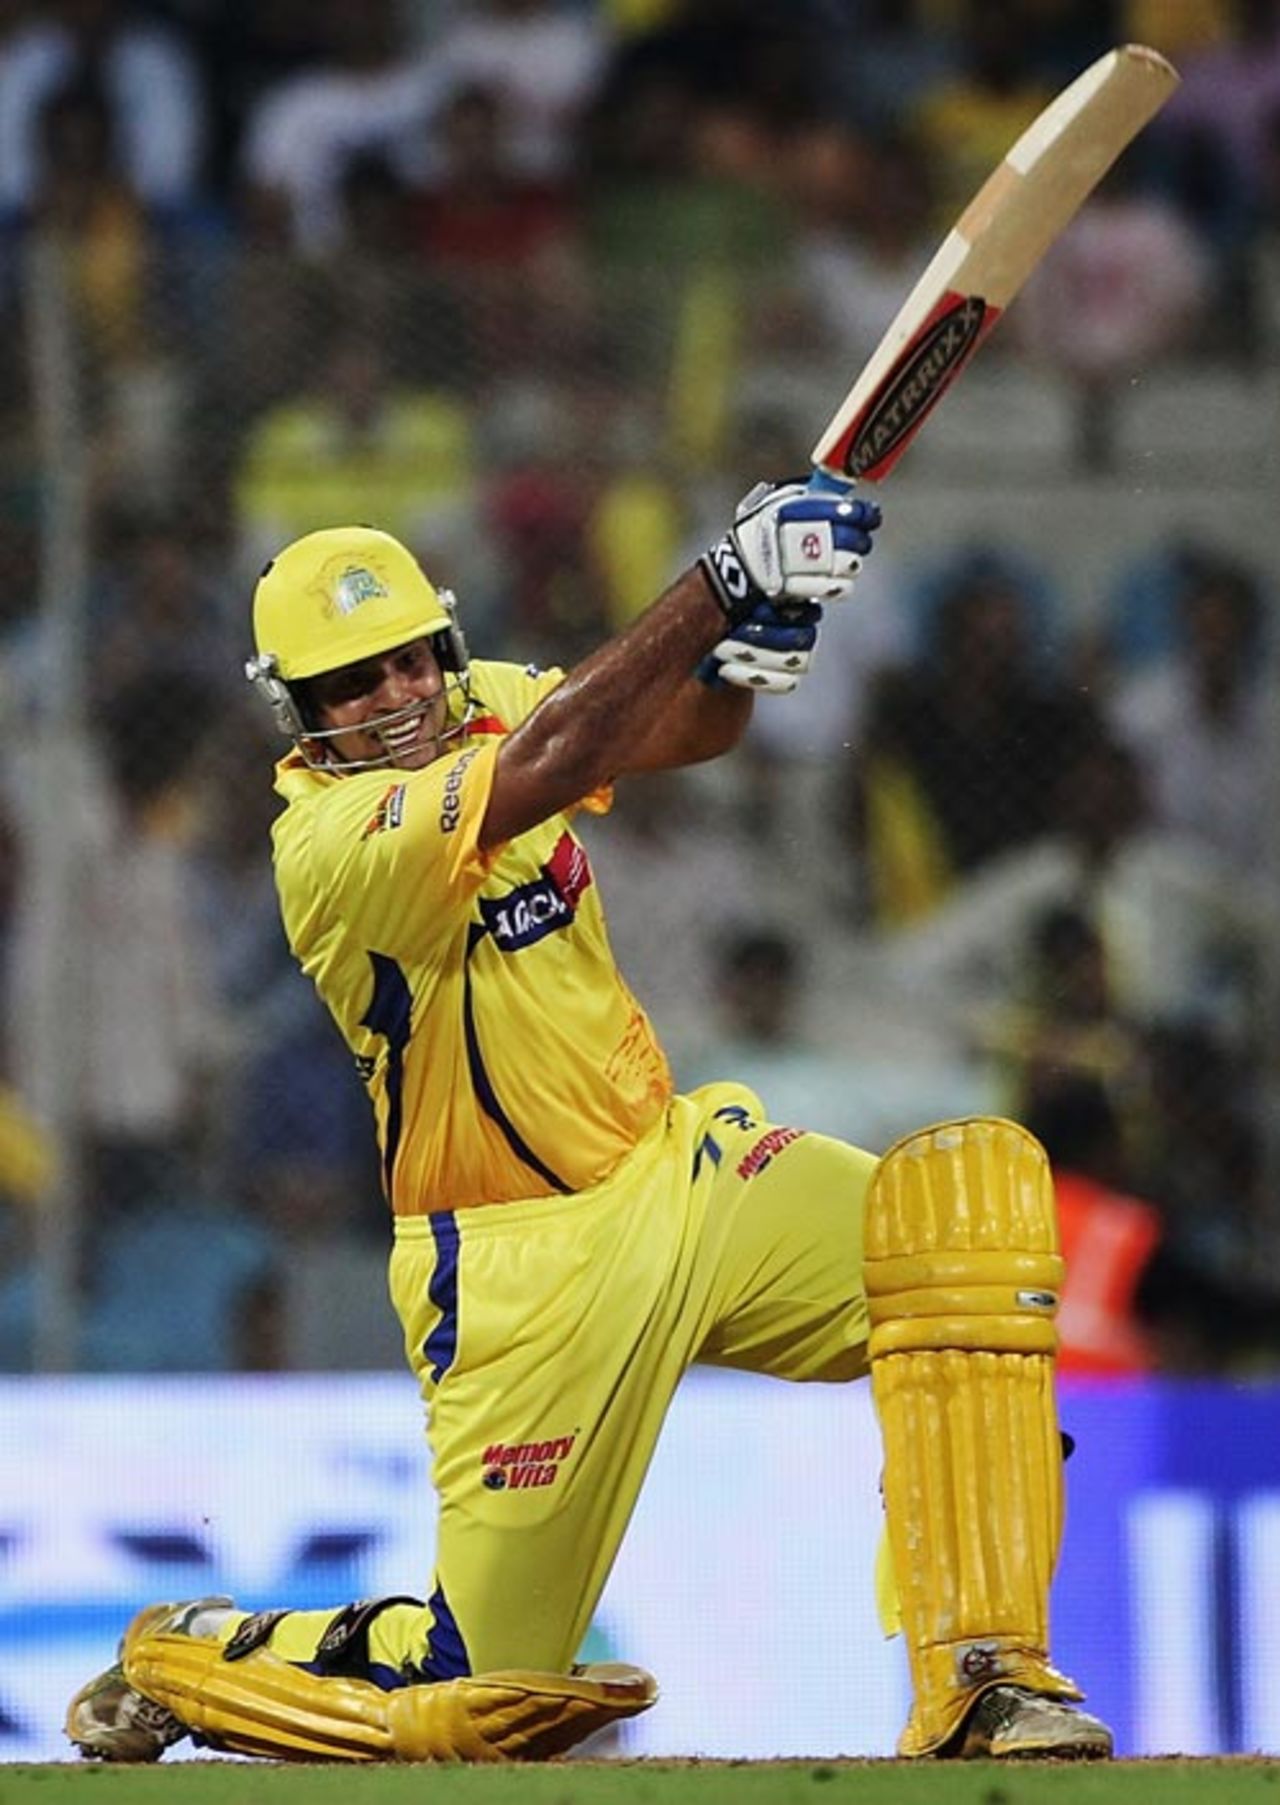 S Anirudha muscles the ball through the off side, Deccan Chargers v Chennai Super Kings, IPL, 2nd semi-final, April 22, 2010